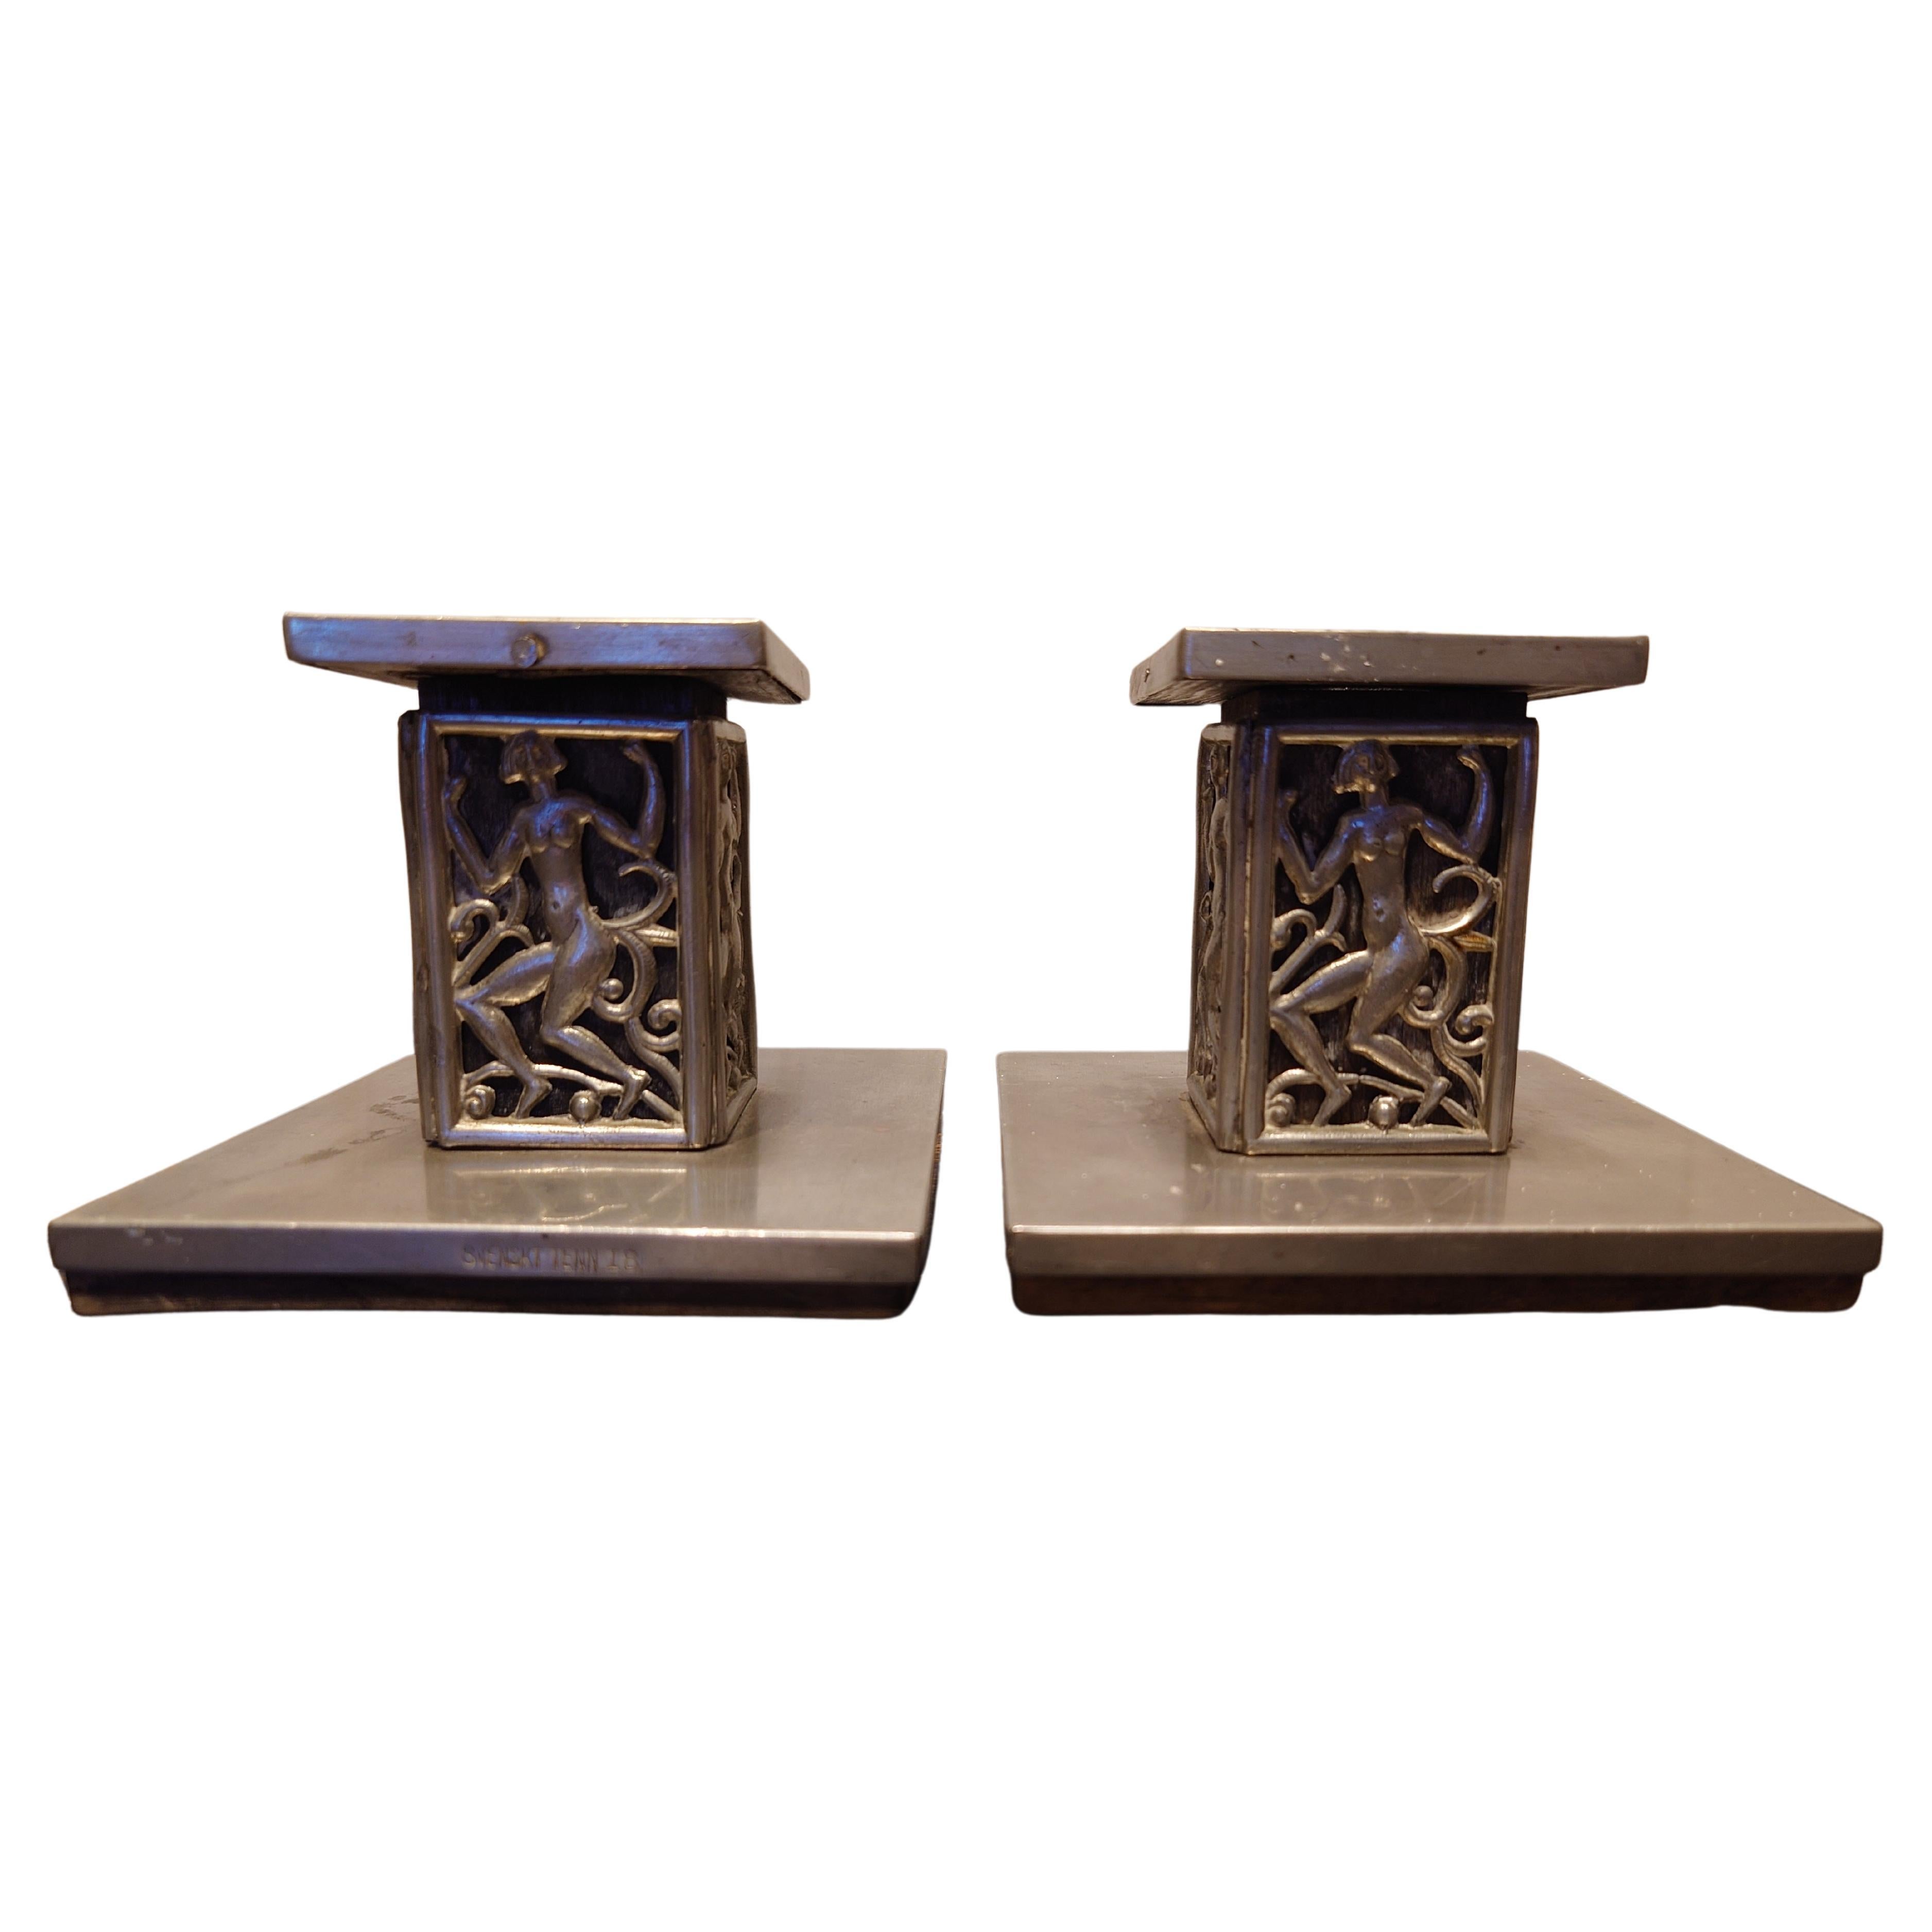 Pewter candlesticks made by David Wretling. Art deco 30s 